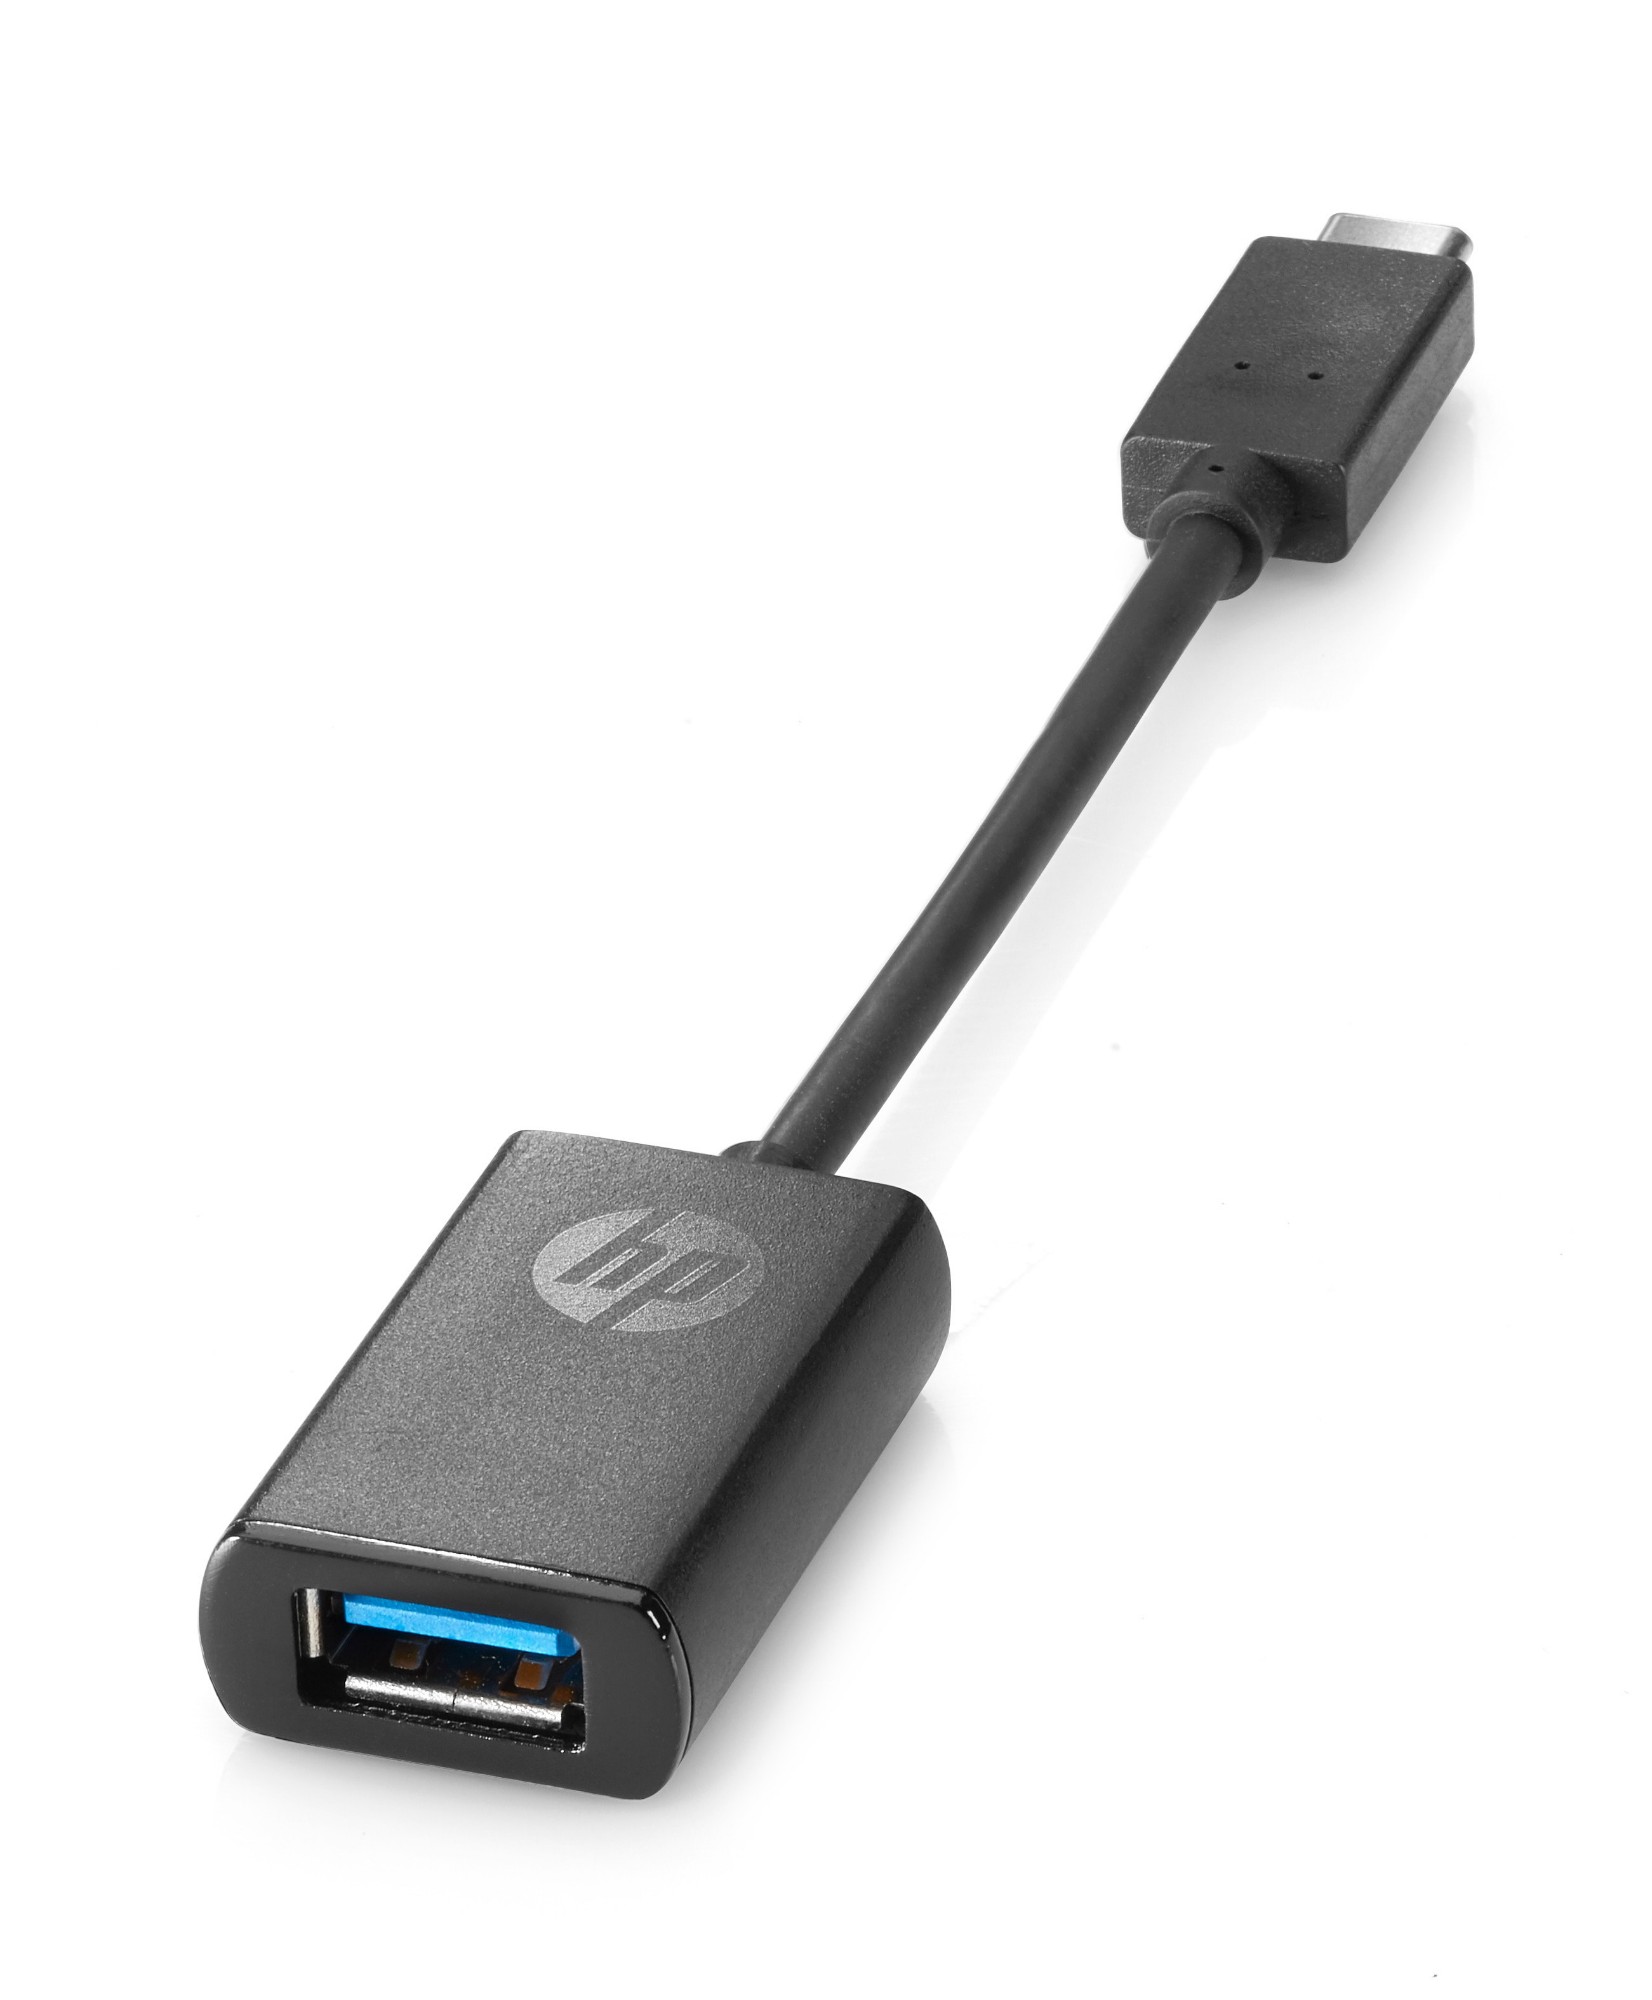 Photos - Cable (video, audio, USB) HP USB-C to USB 3.0 Adapter N2Z63AA 